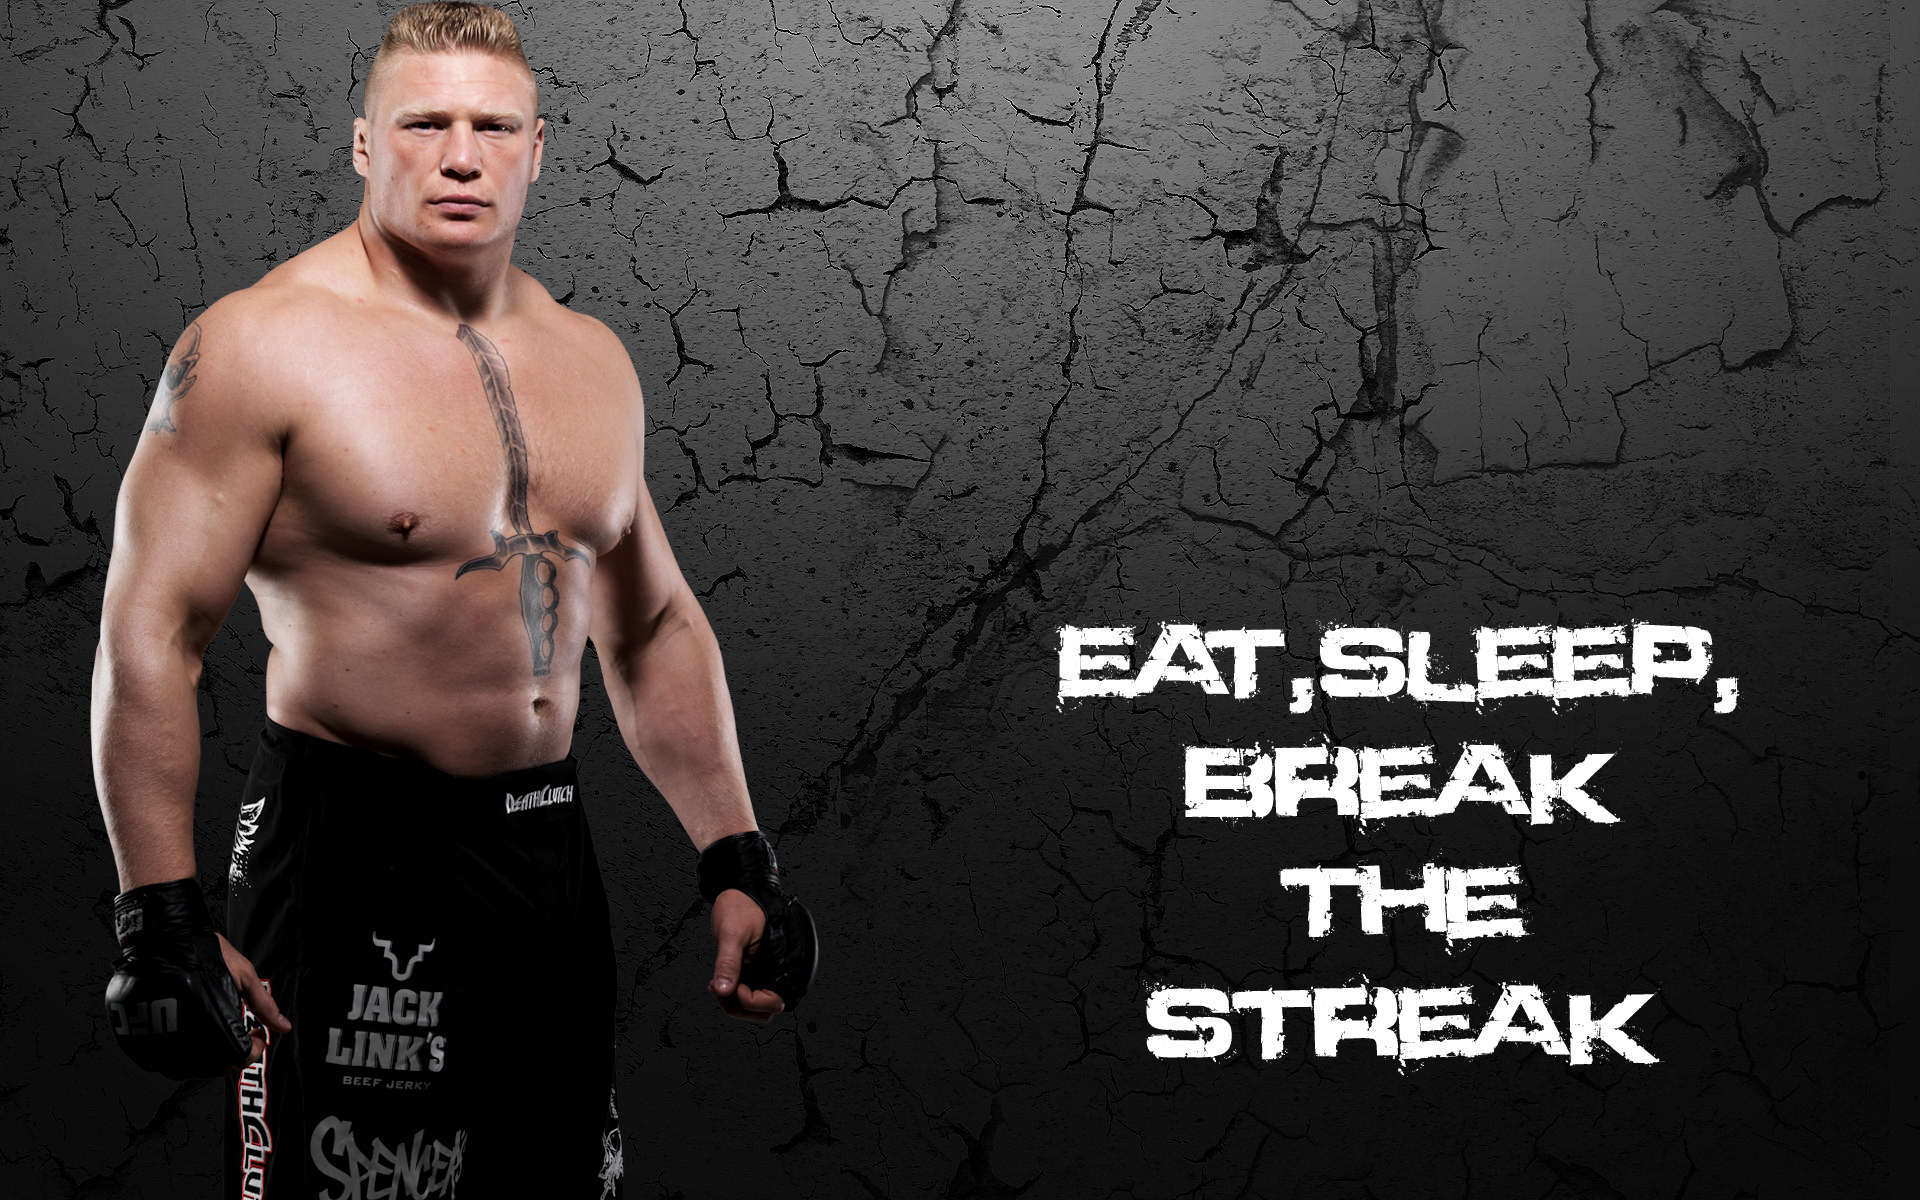 Free download Brock Lesnar Suplex City amp F5 Wallpapers HD Pictures  [1600x900] for your Desktop, Mobile & Tablet | Explore 75+ Brock Lesnar  Wallpapers | Brock Lesnar Hd Wallpaper 2015, Brock Lesnar